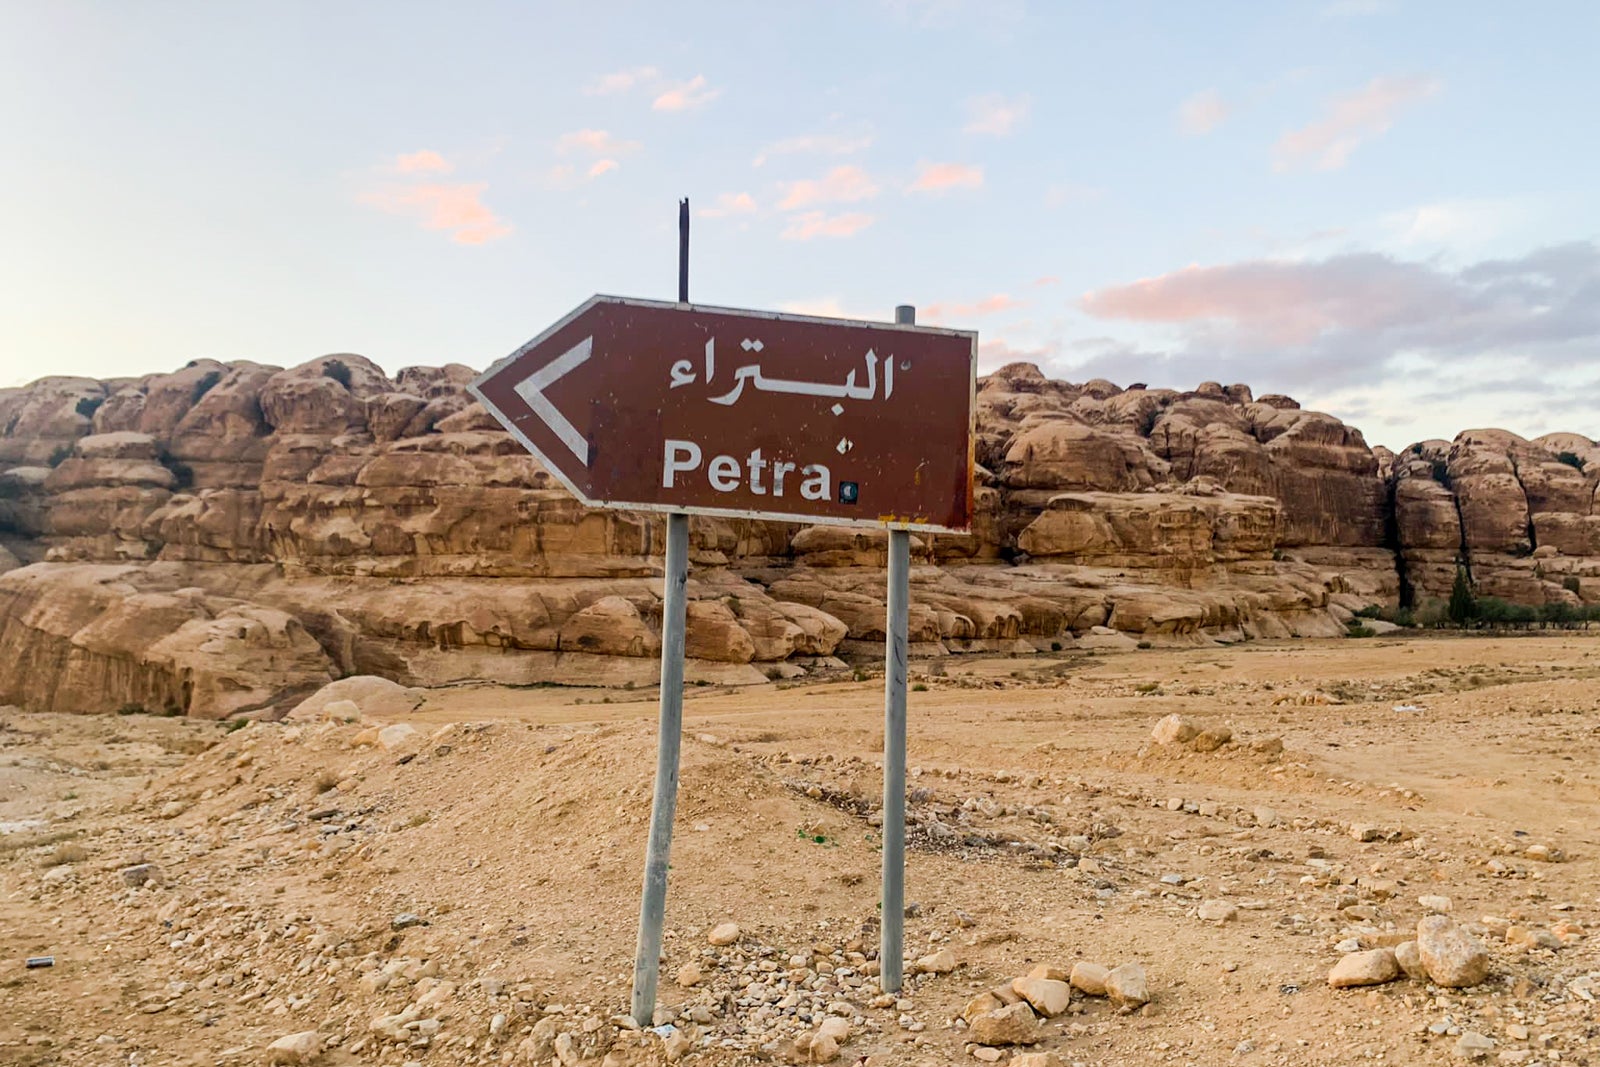 a sign in the desert indicates a left turn to drive toward Petra